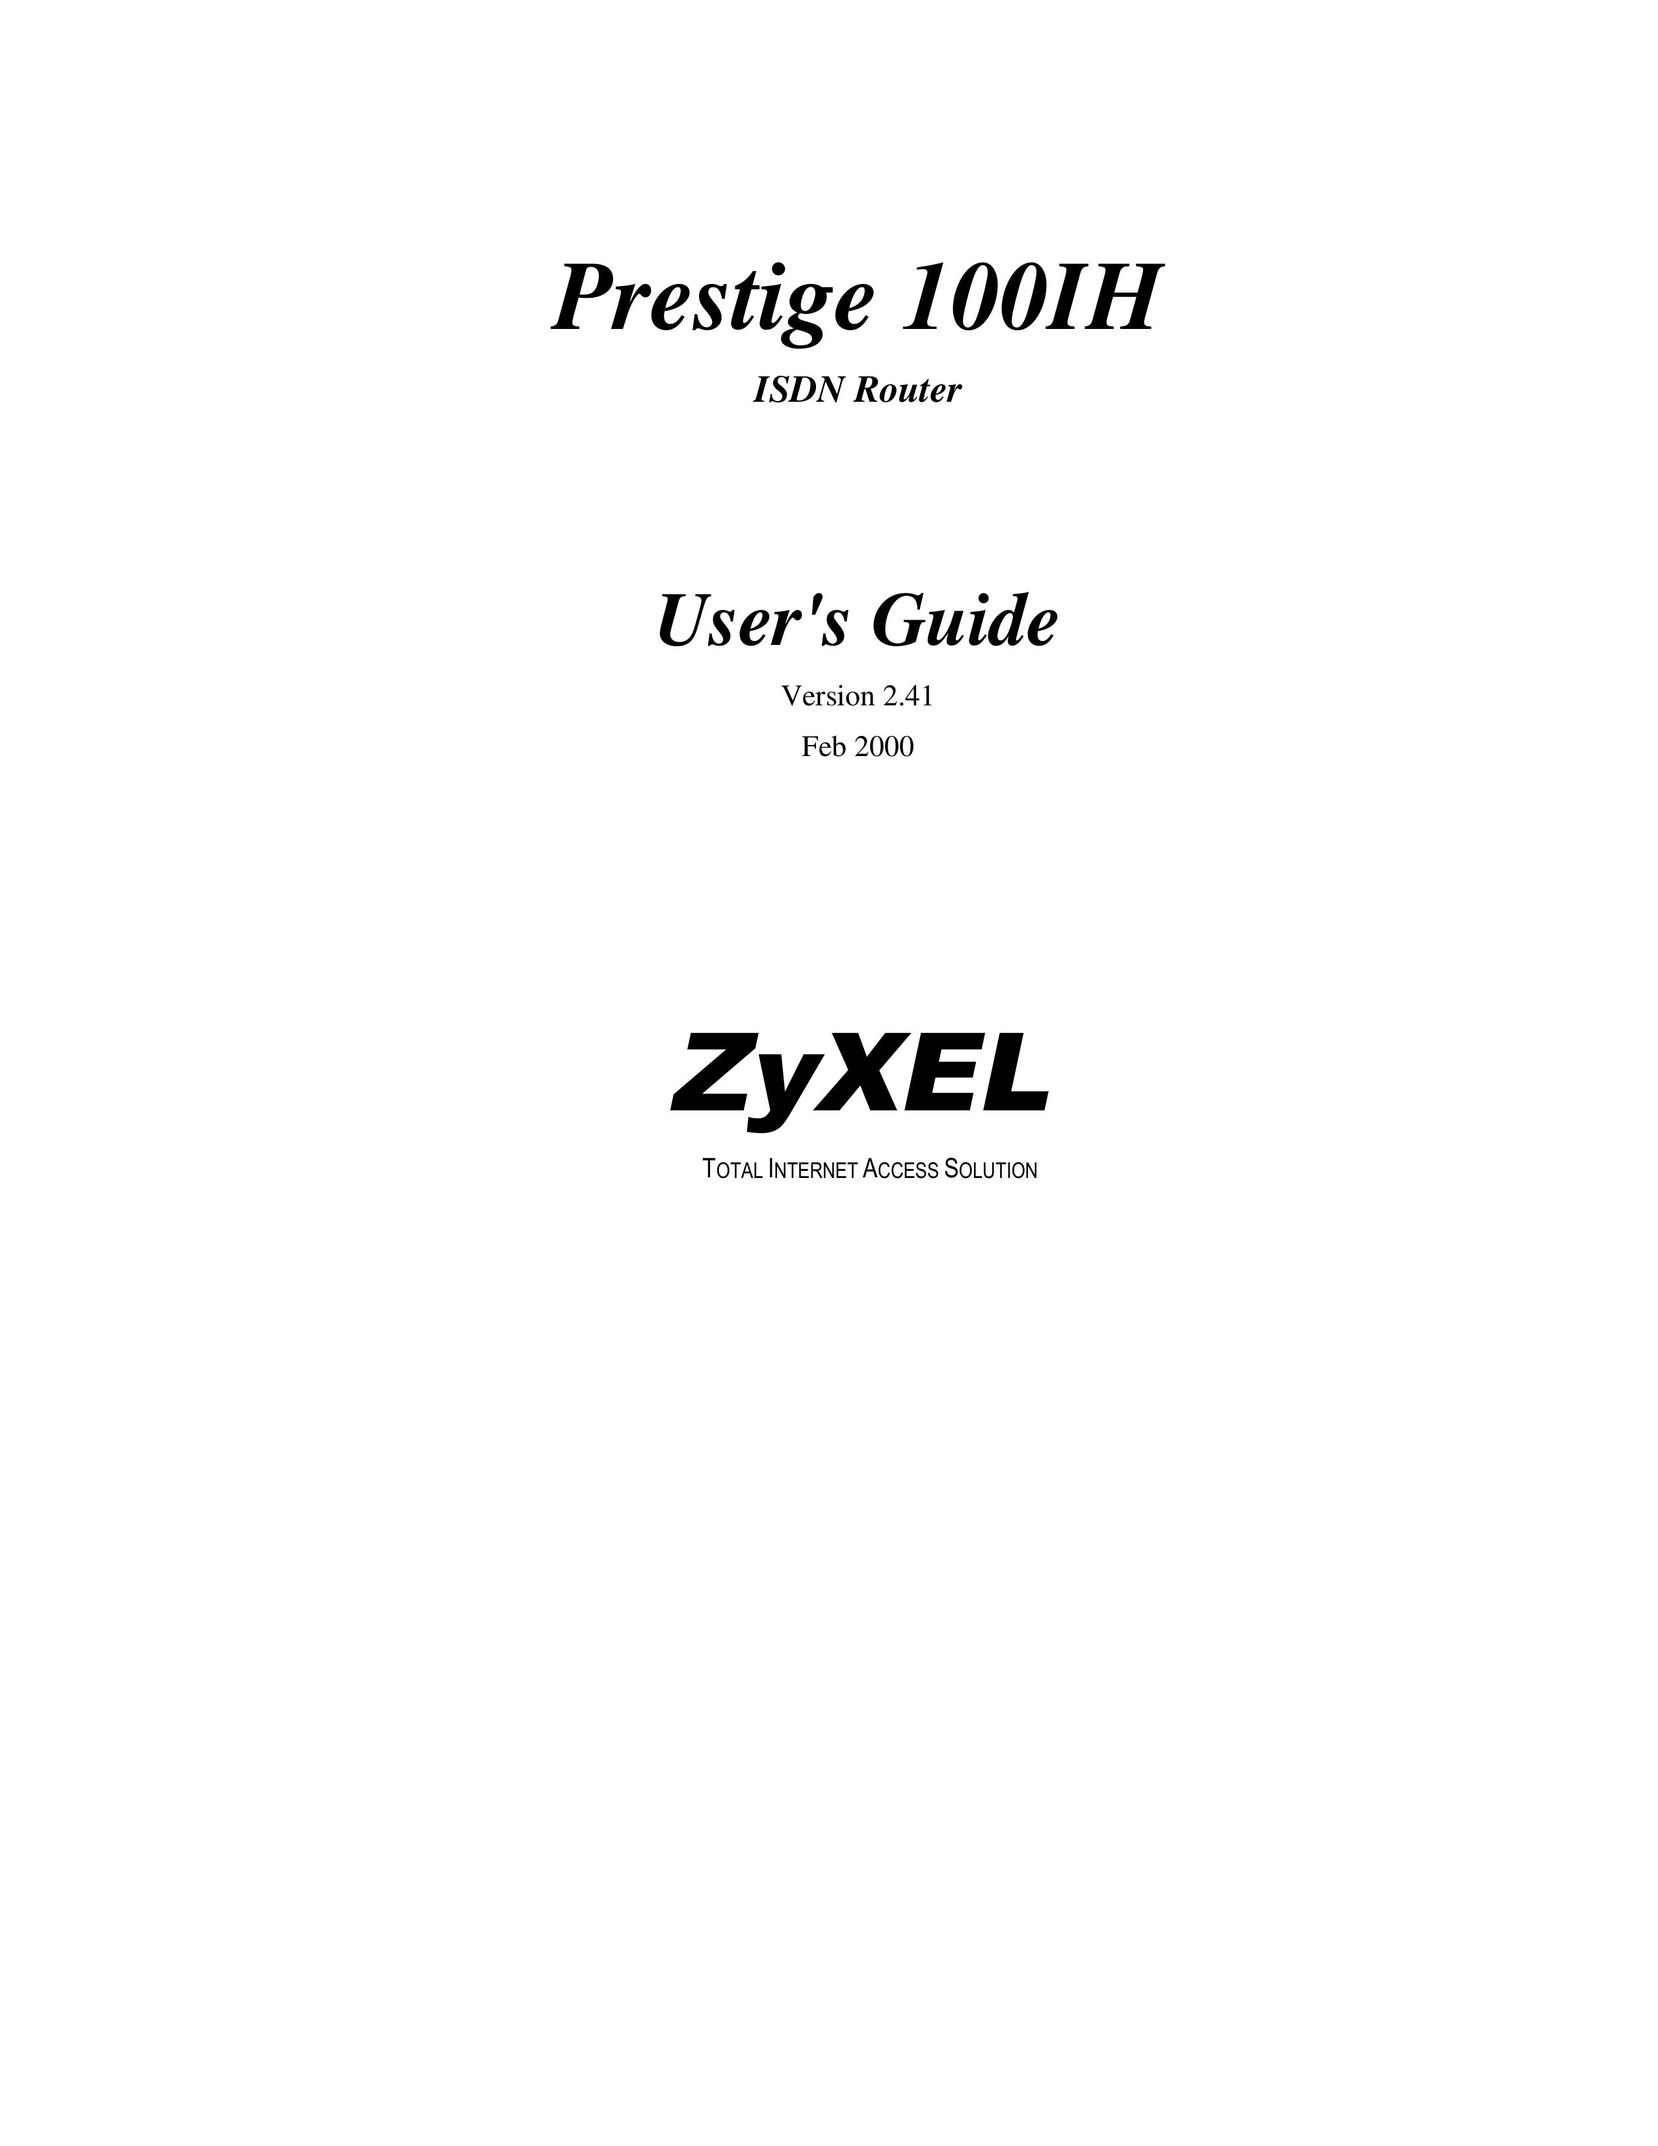 ZyXEL Communications 1001H Network Router User Manual